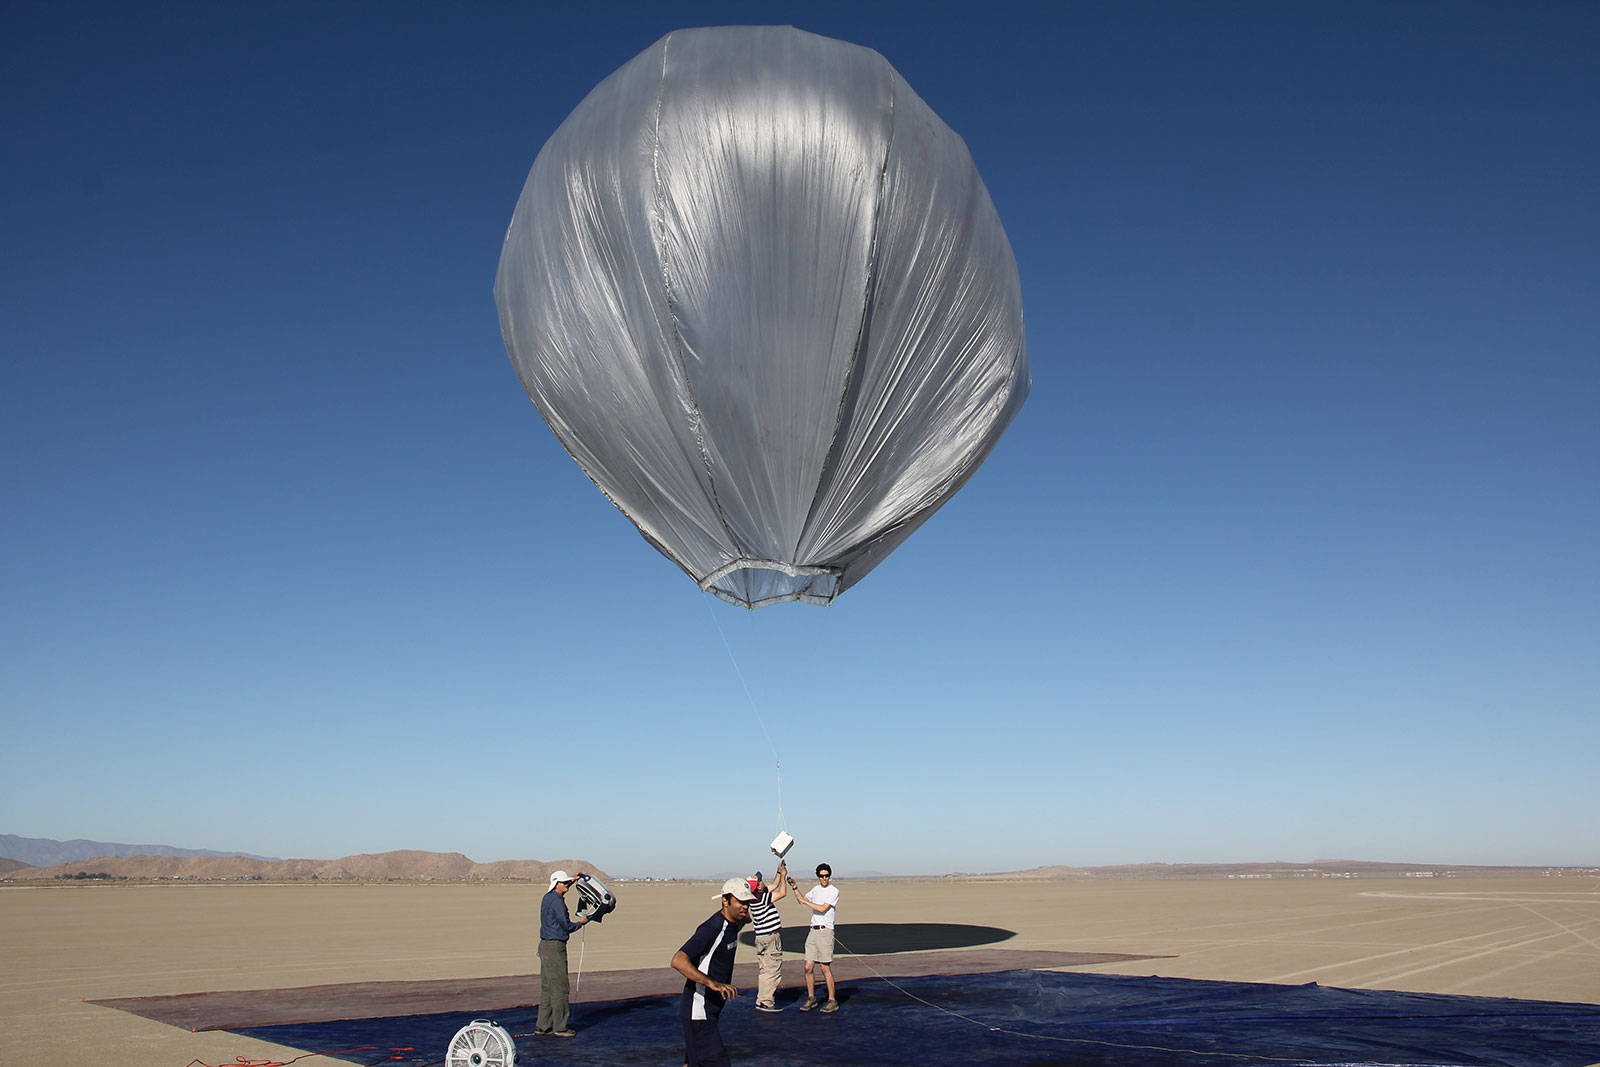 A team of JPL engineers tests whether a large balloon can measure earthquakes from the air